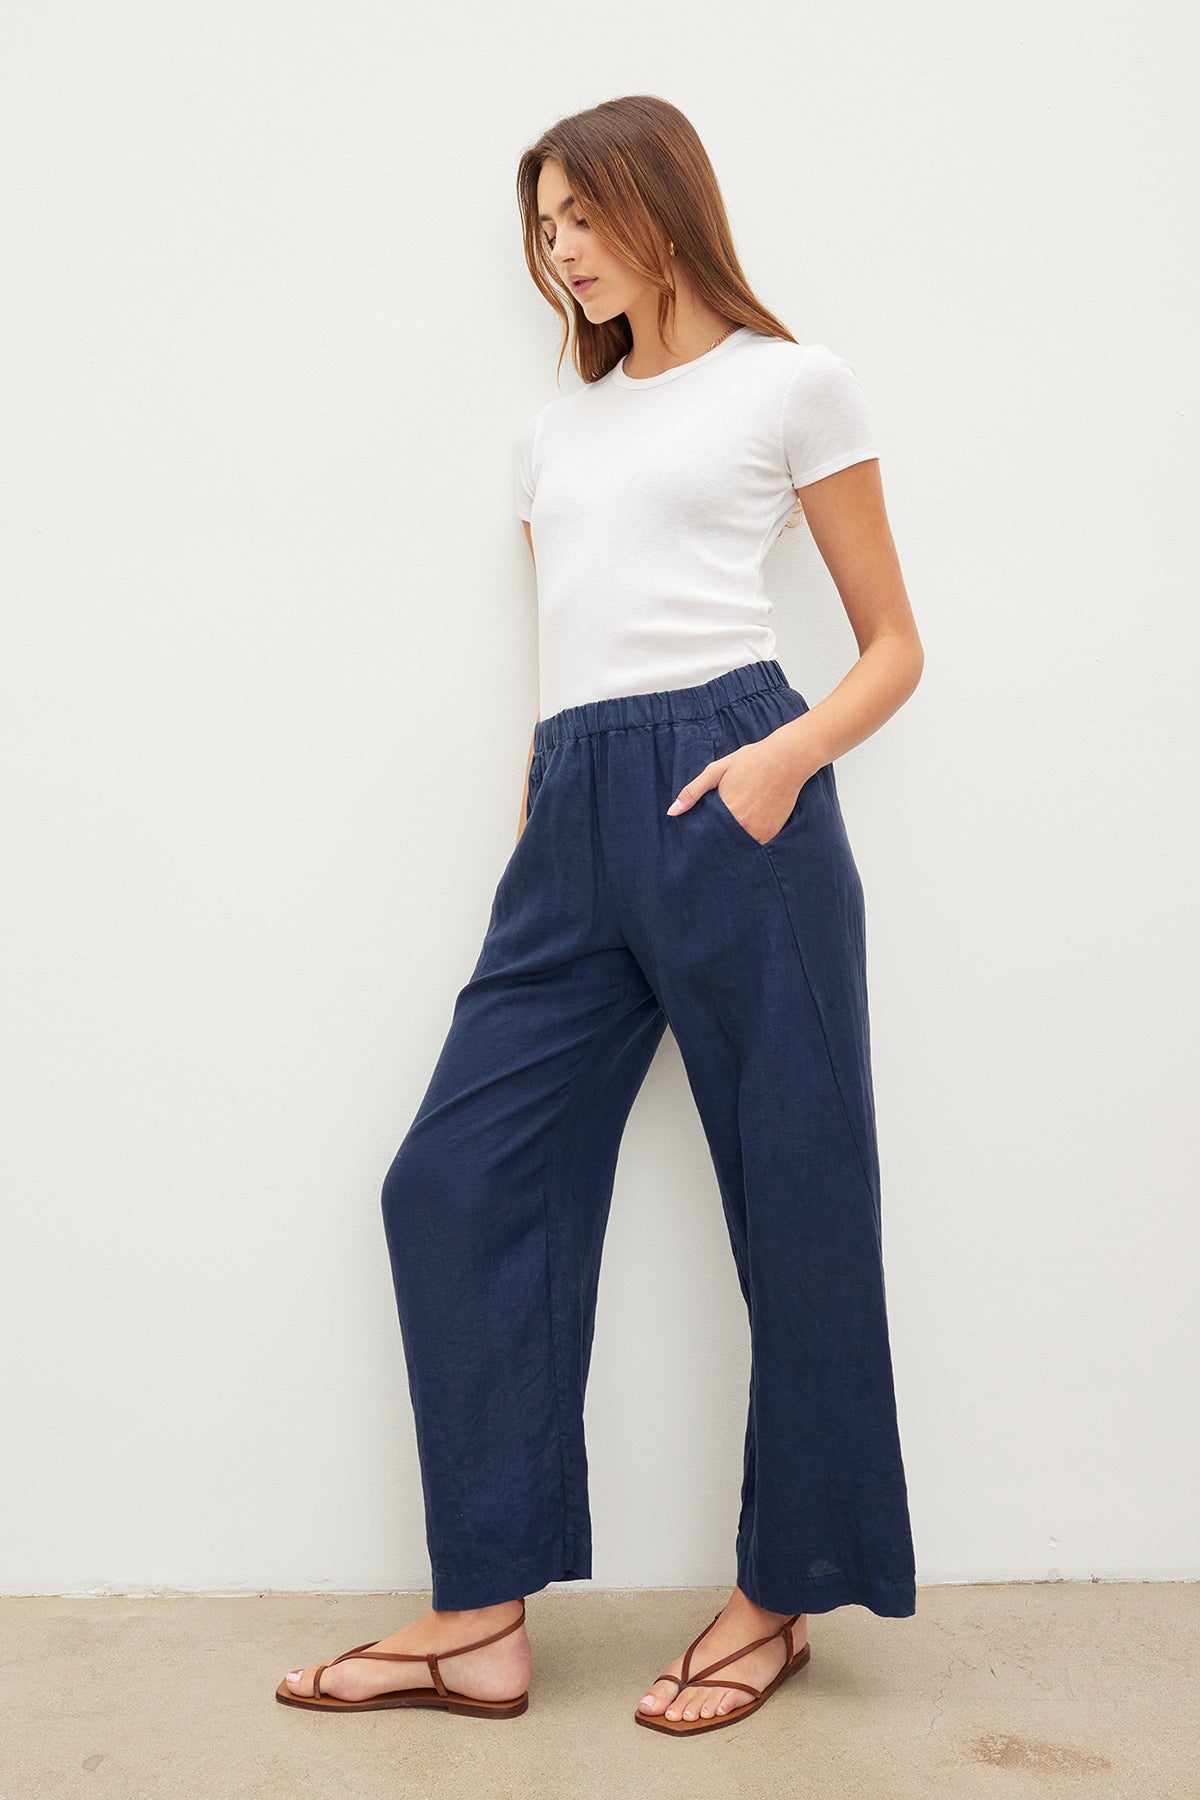 A woman wearing Velvet by Graham & Spencer LOLA LINEN PANT with an elastic waist.-36161318551745